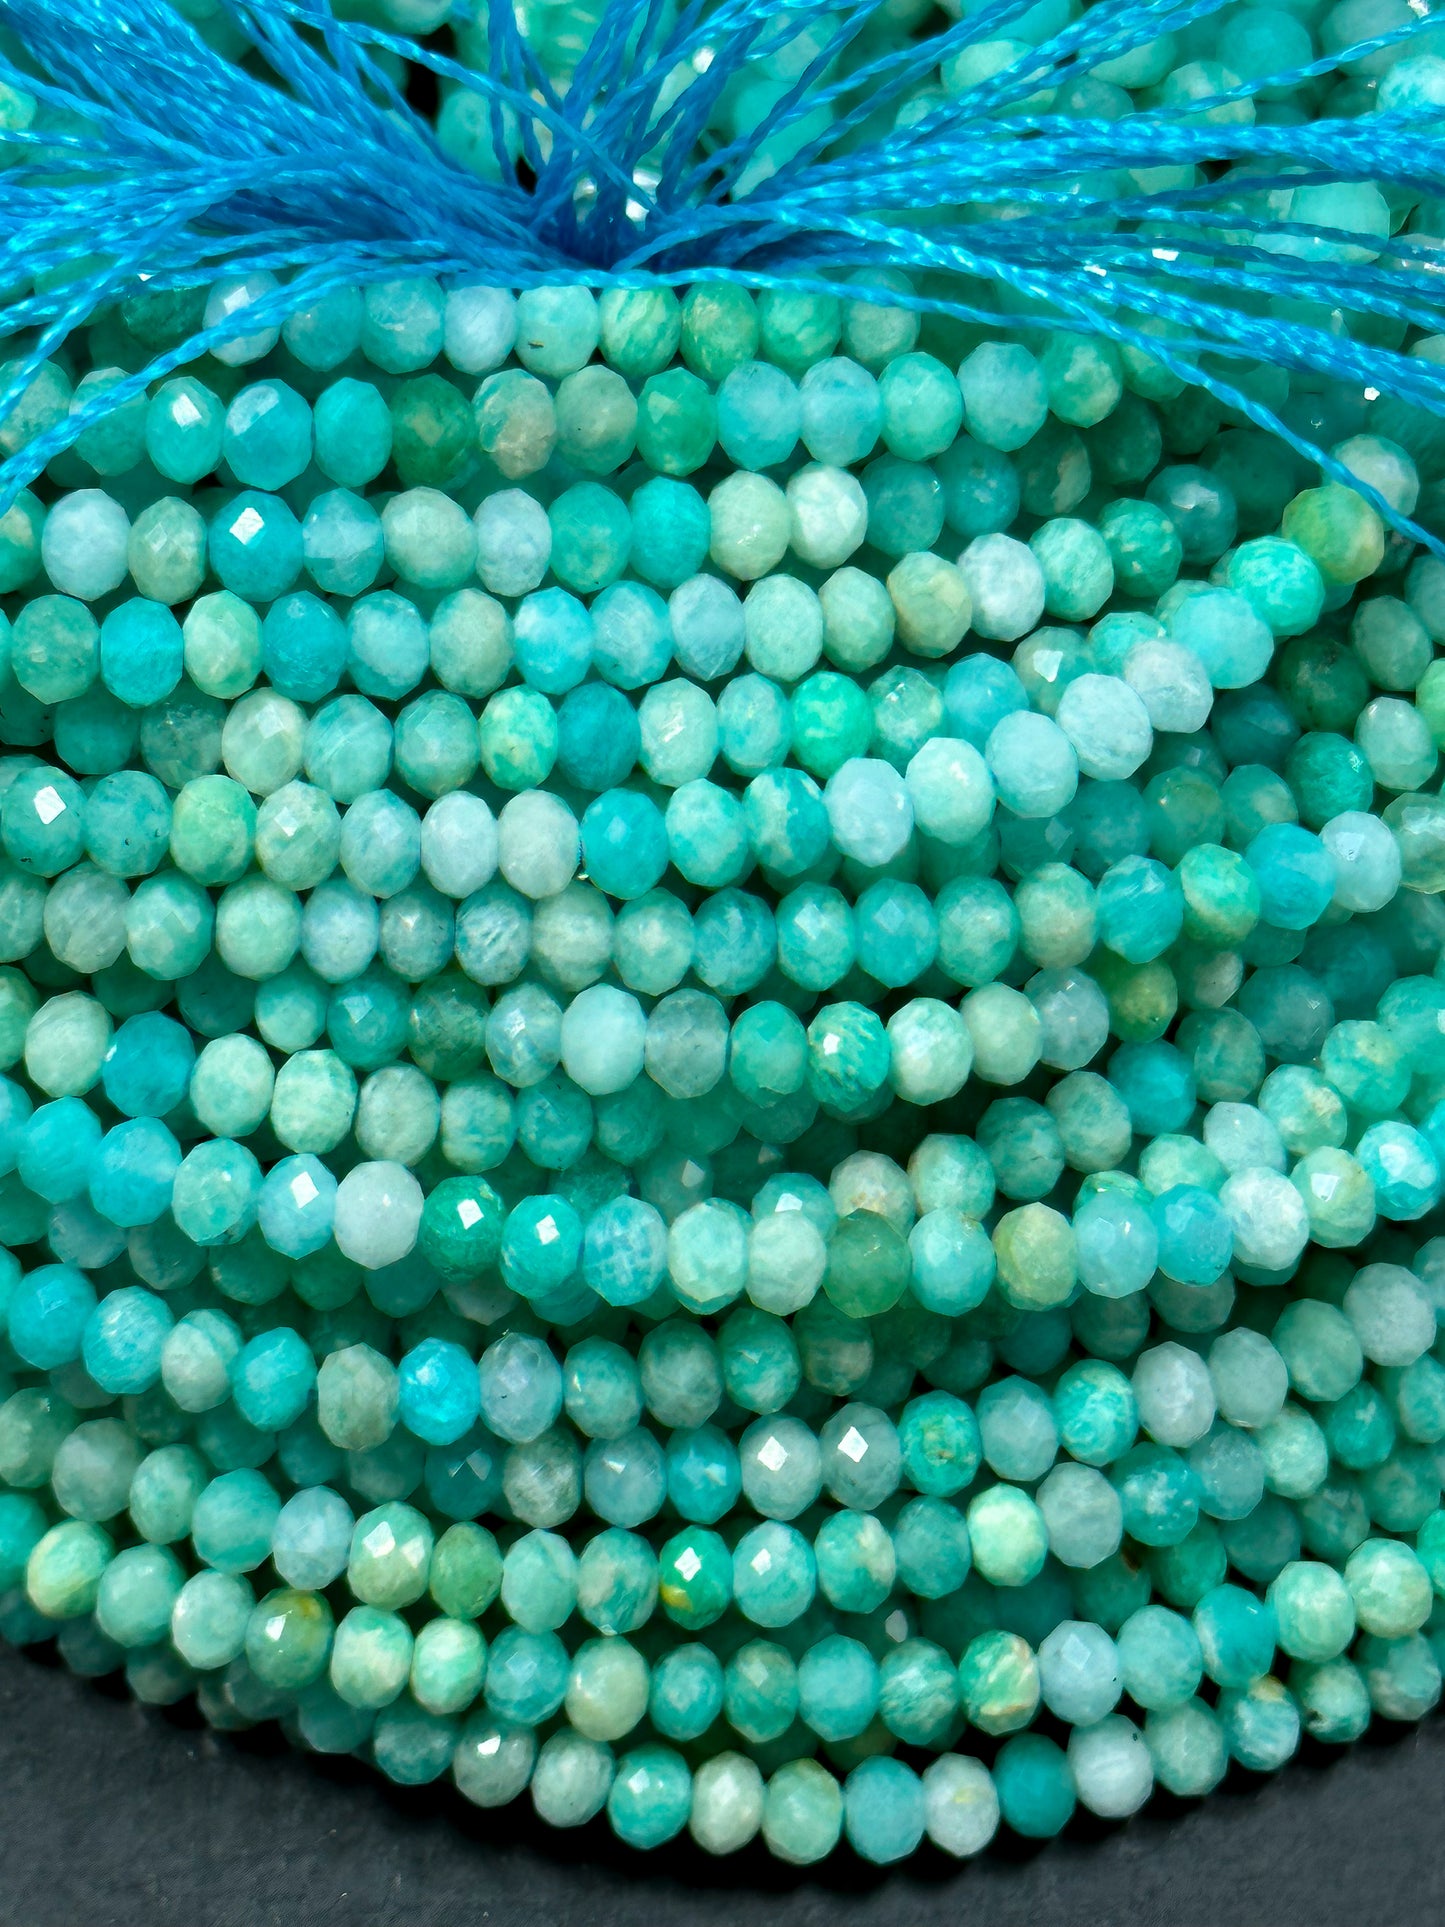 NATURAL Amazonite Gemstone Bead Faceted 3mm Rondelle Shape Bead, Beautiful Natural Green Blue Color Amazonite Loose Beads Full Strand 15.5"